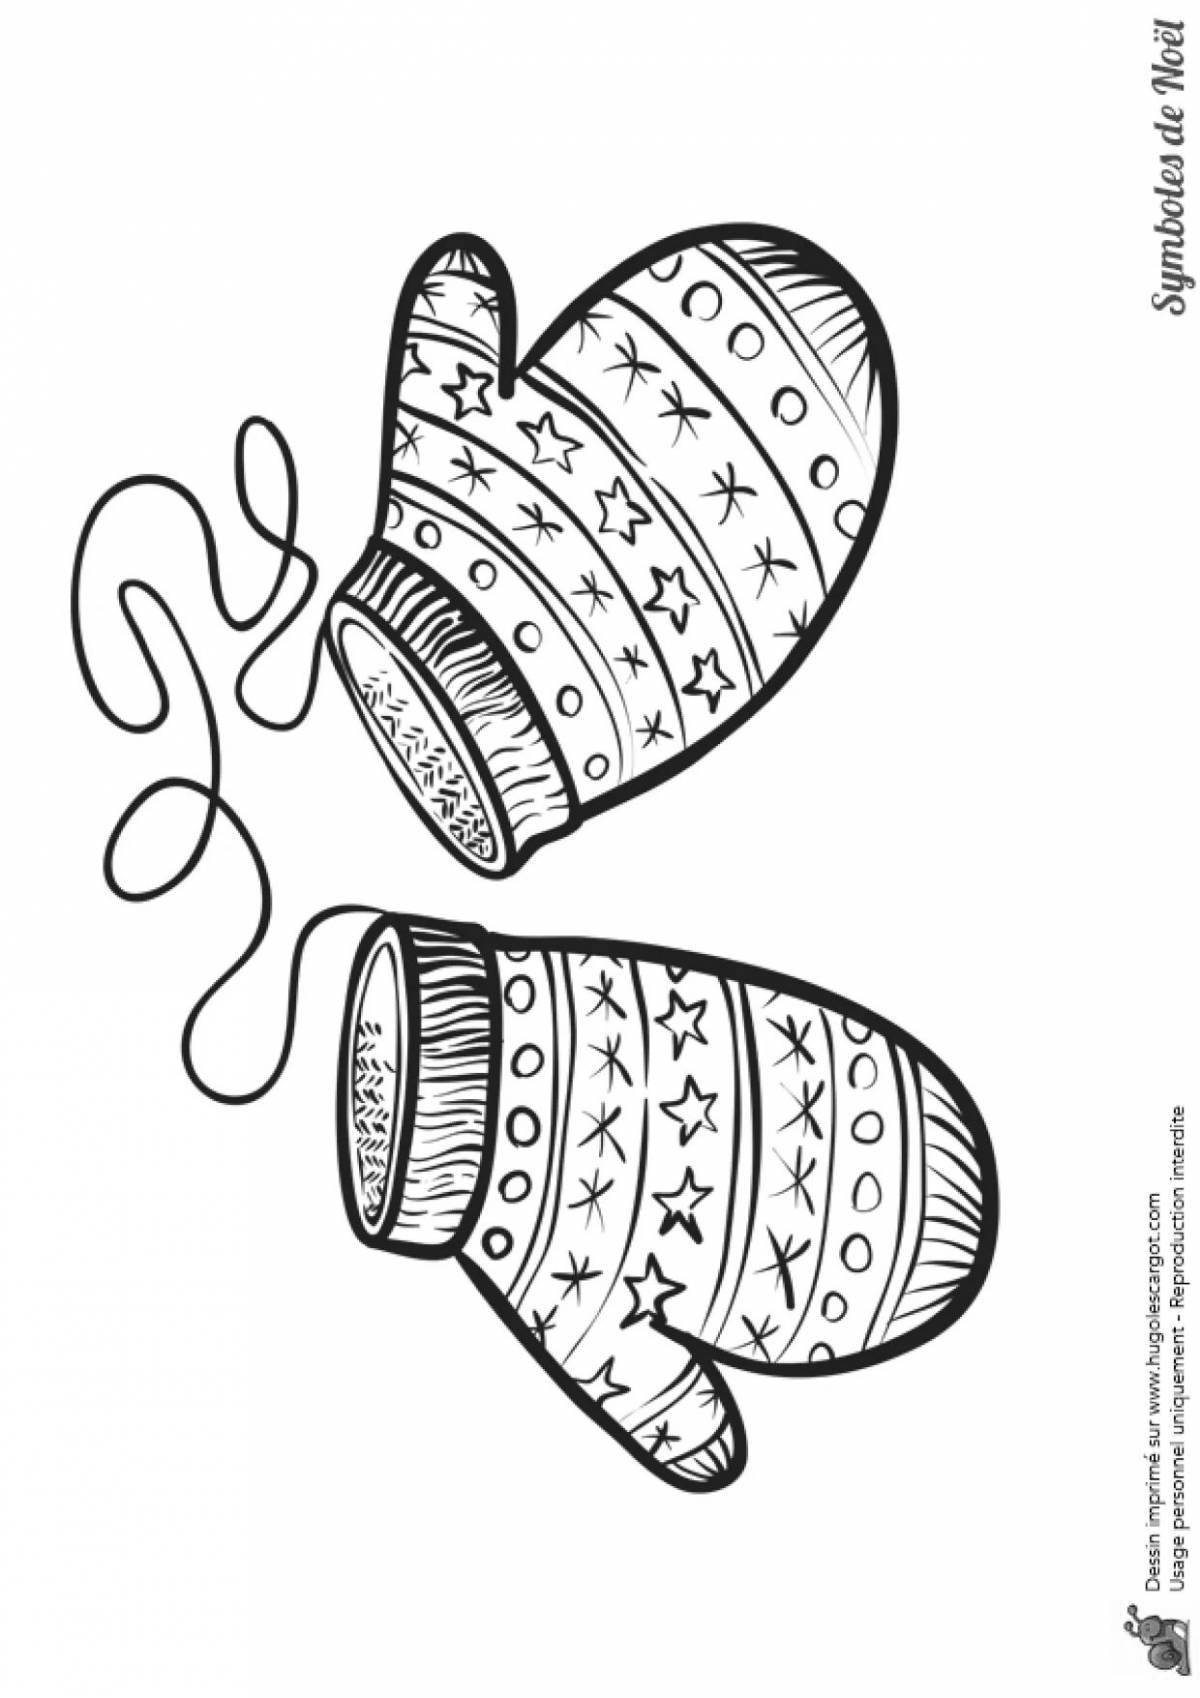 Colored patterned mittens coloring book for kids